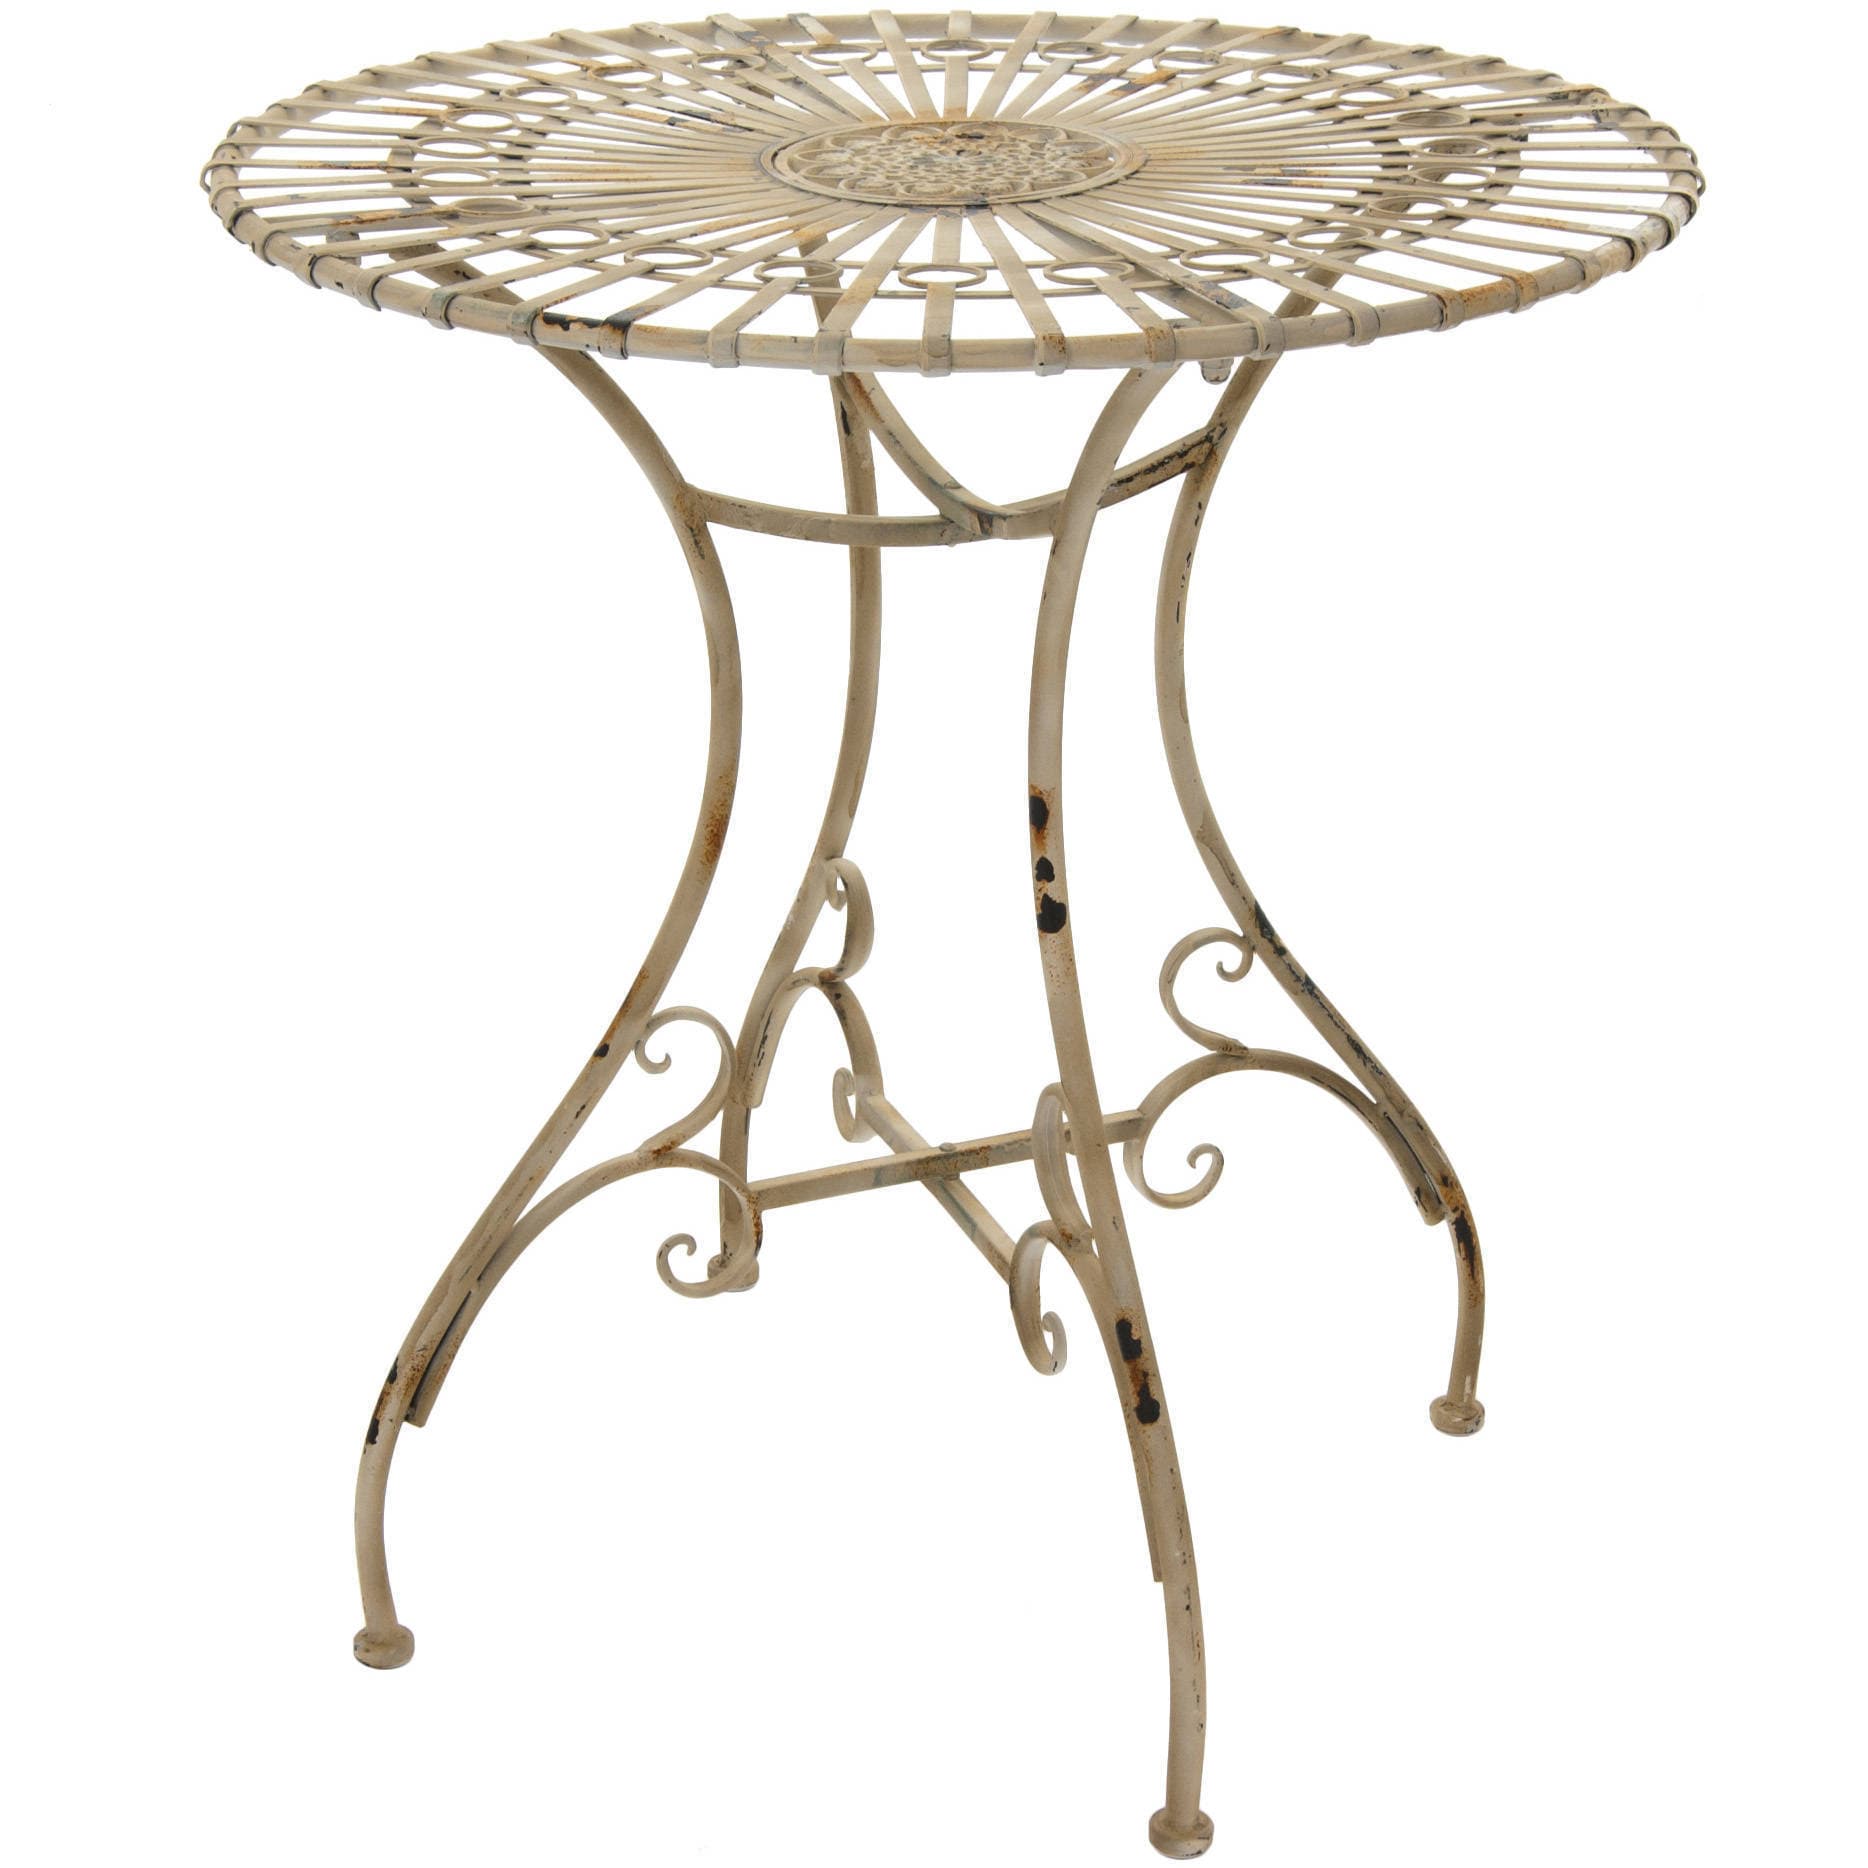 Shop Handmade Rustic Distressed White Garden Table (China) - Free ...